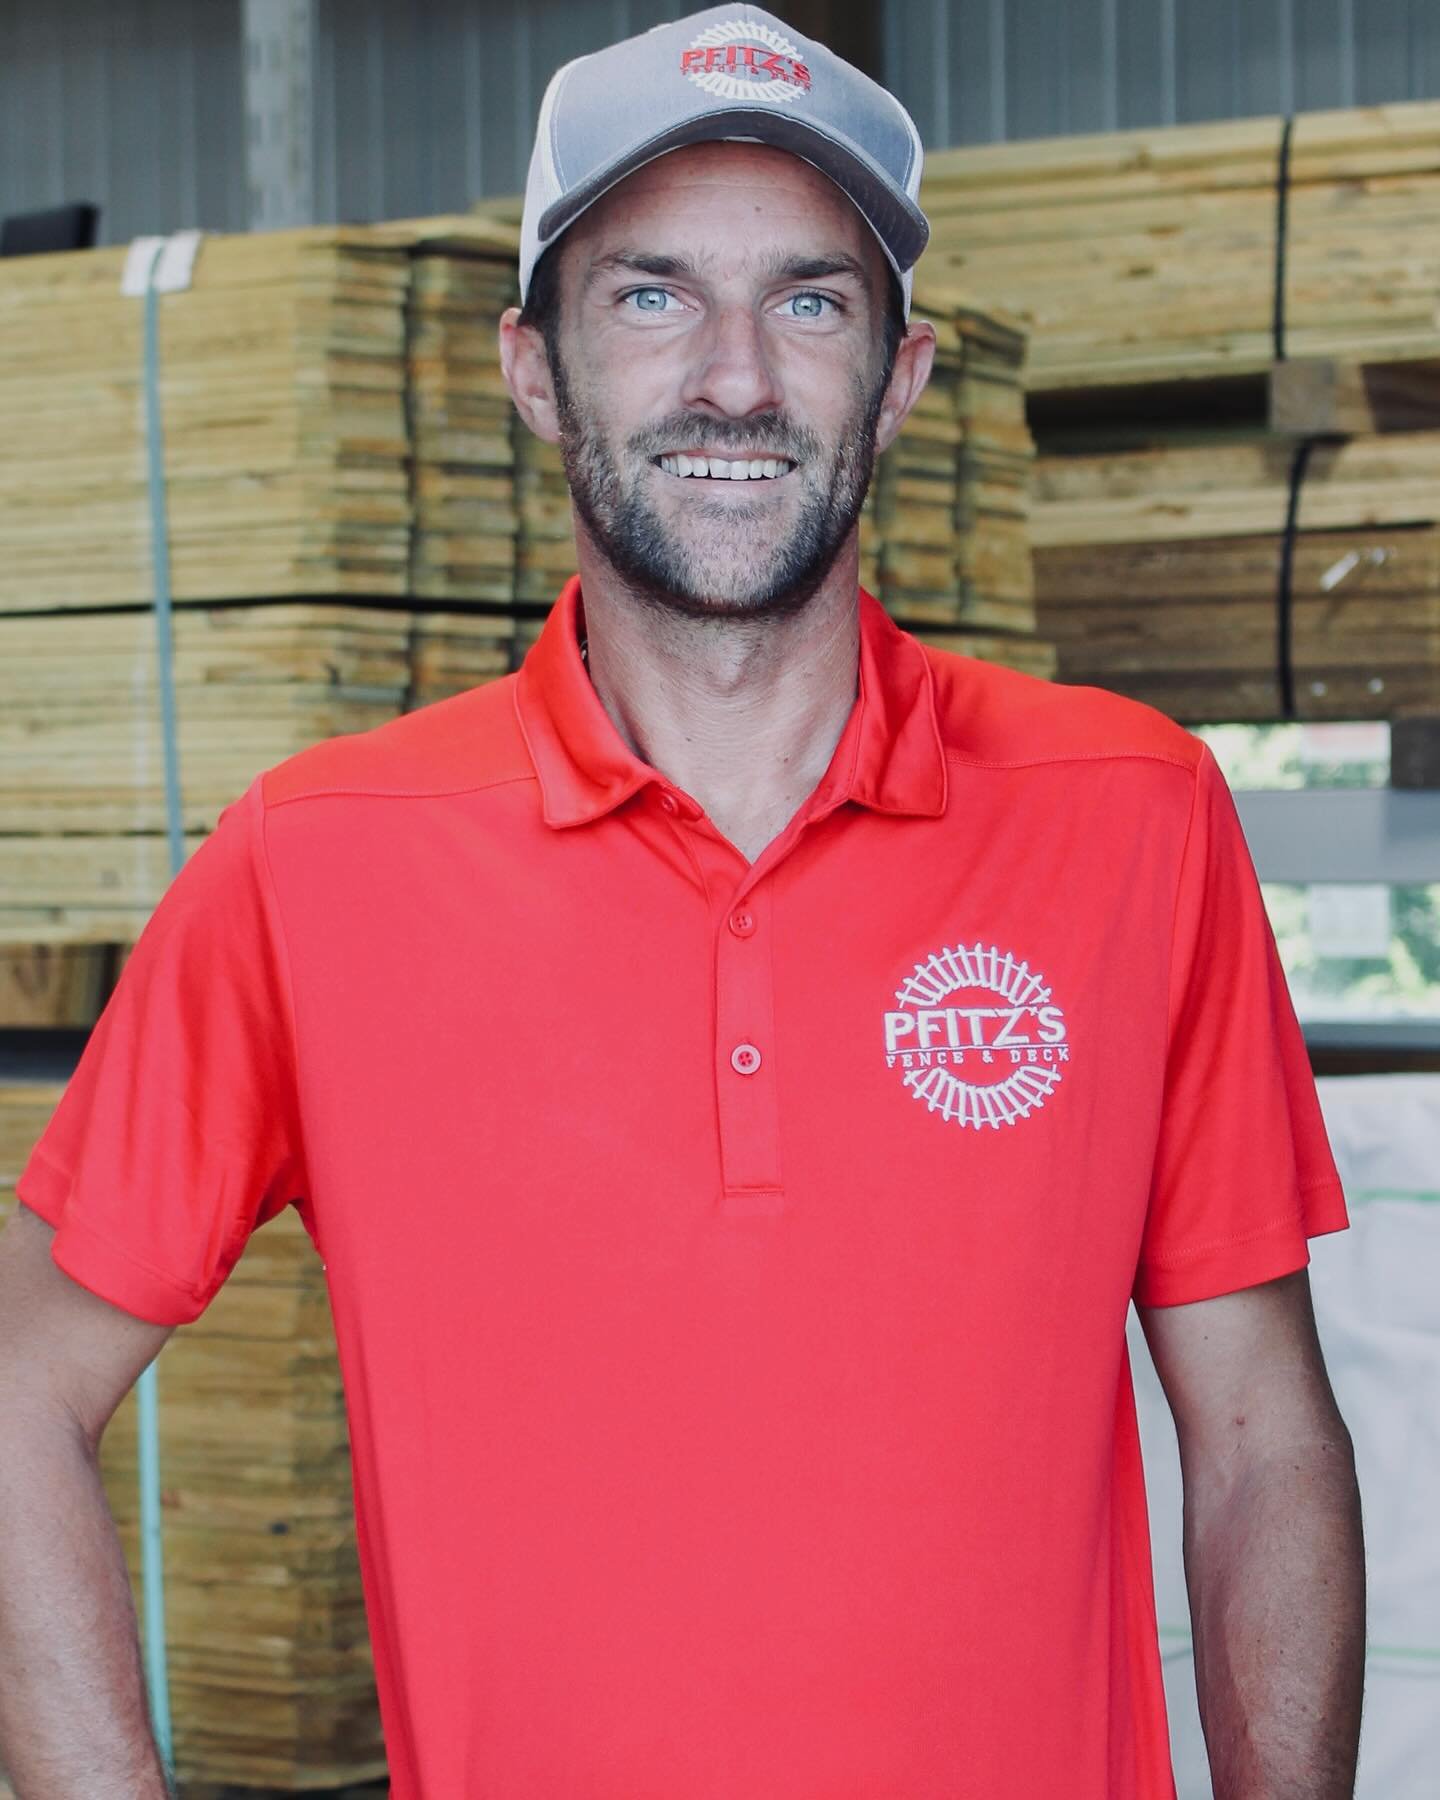 Over the next few months we&rsquo;ll be re-introducing you to the Pfitz&rsquo;s Fence &amp; Deck team that you met last summer. So tonight, meet Pfitz&rsquo;s Fence &amp; Deck owner, Kyle Pfitzenmaier.

Kyle's a Bettendorf native &mdash; born and rai